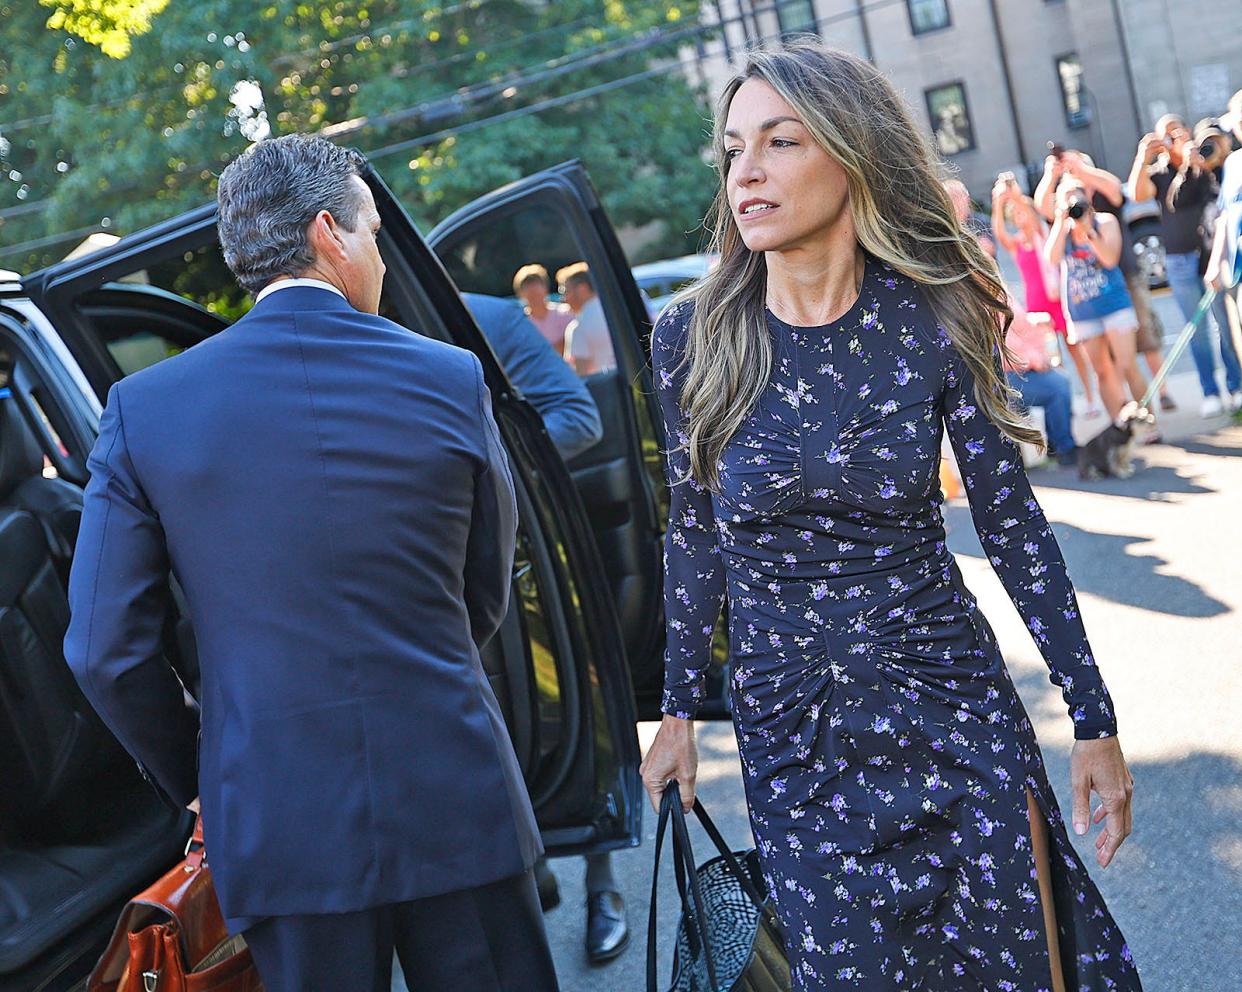 Karen Read arrived at the courthouse in Dedham, Massachusetts for closing arguments in her trial on Tuesday.